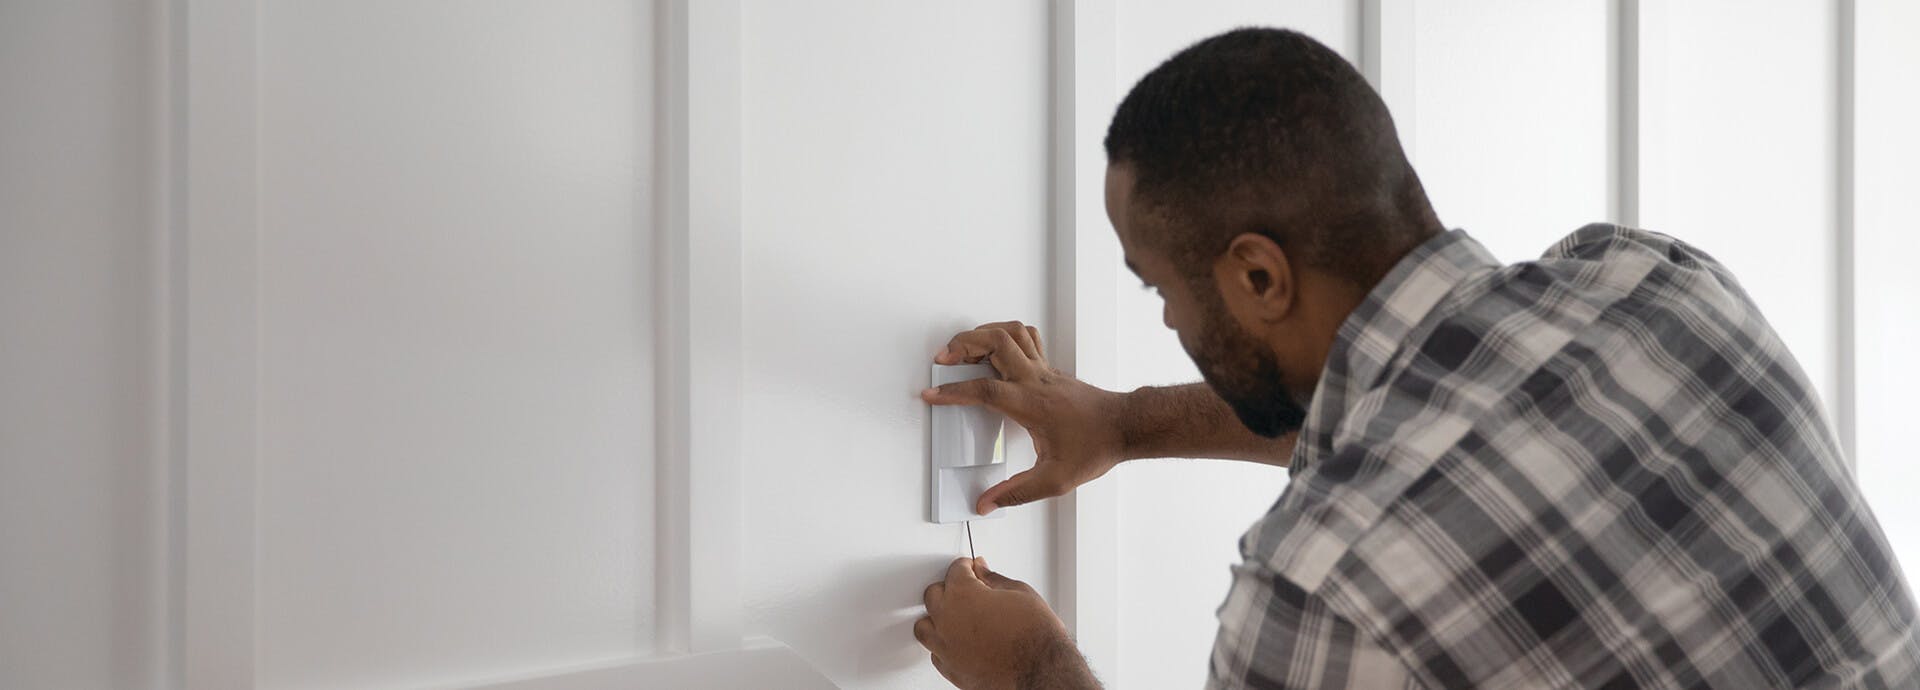 Man installing a dimmer light switch on a wall